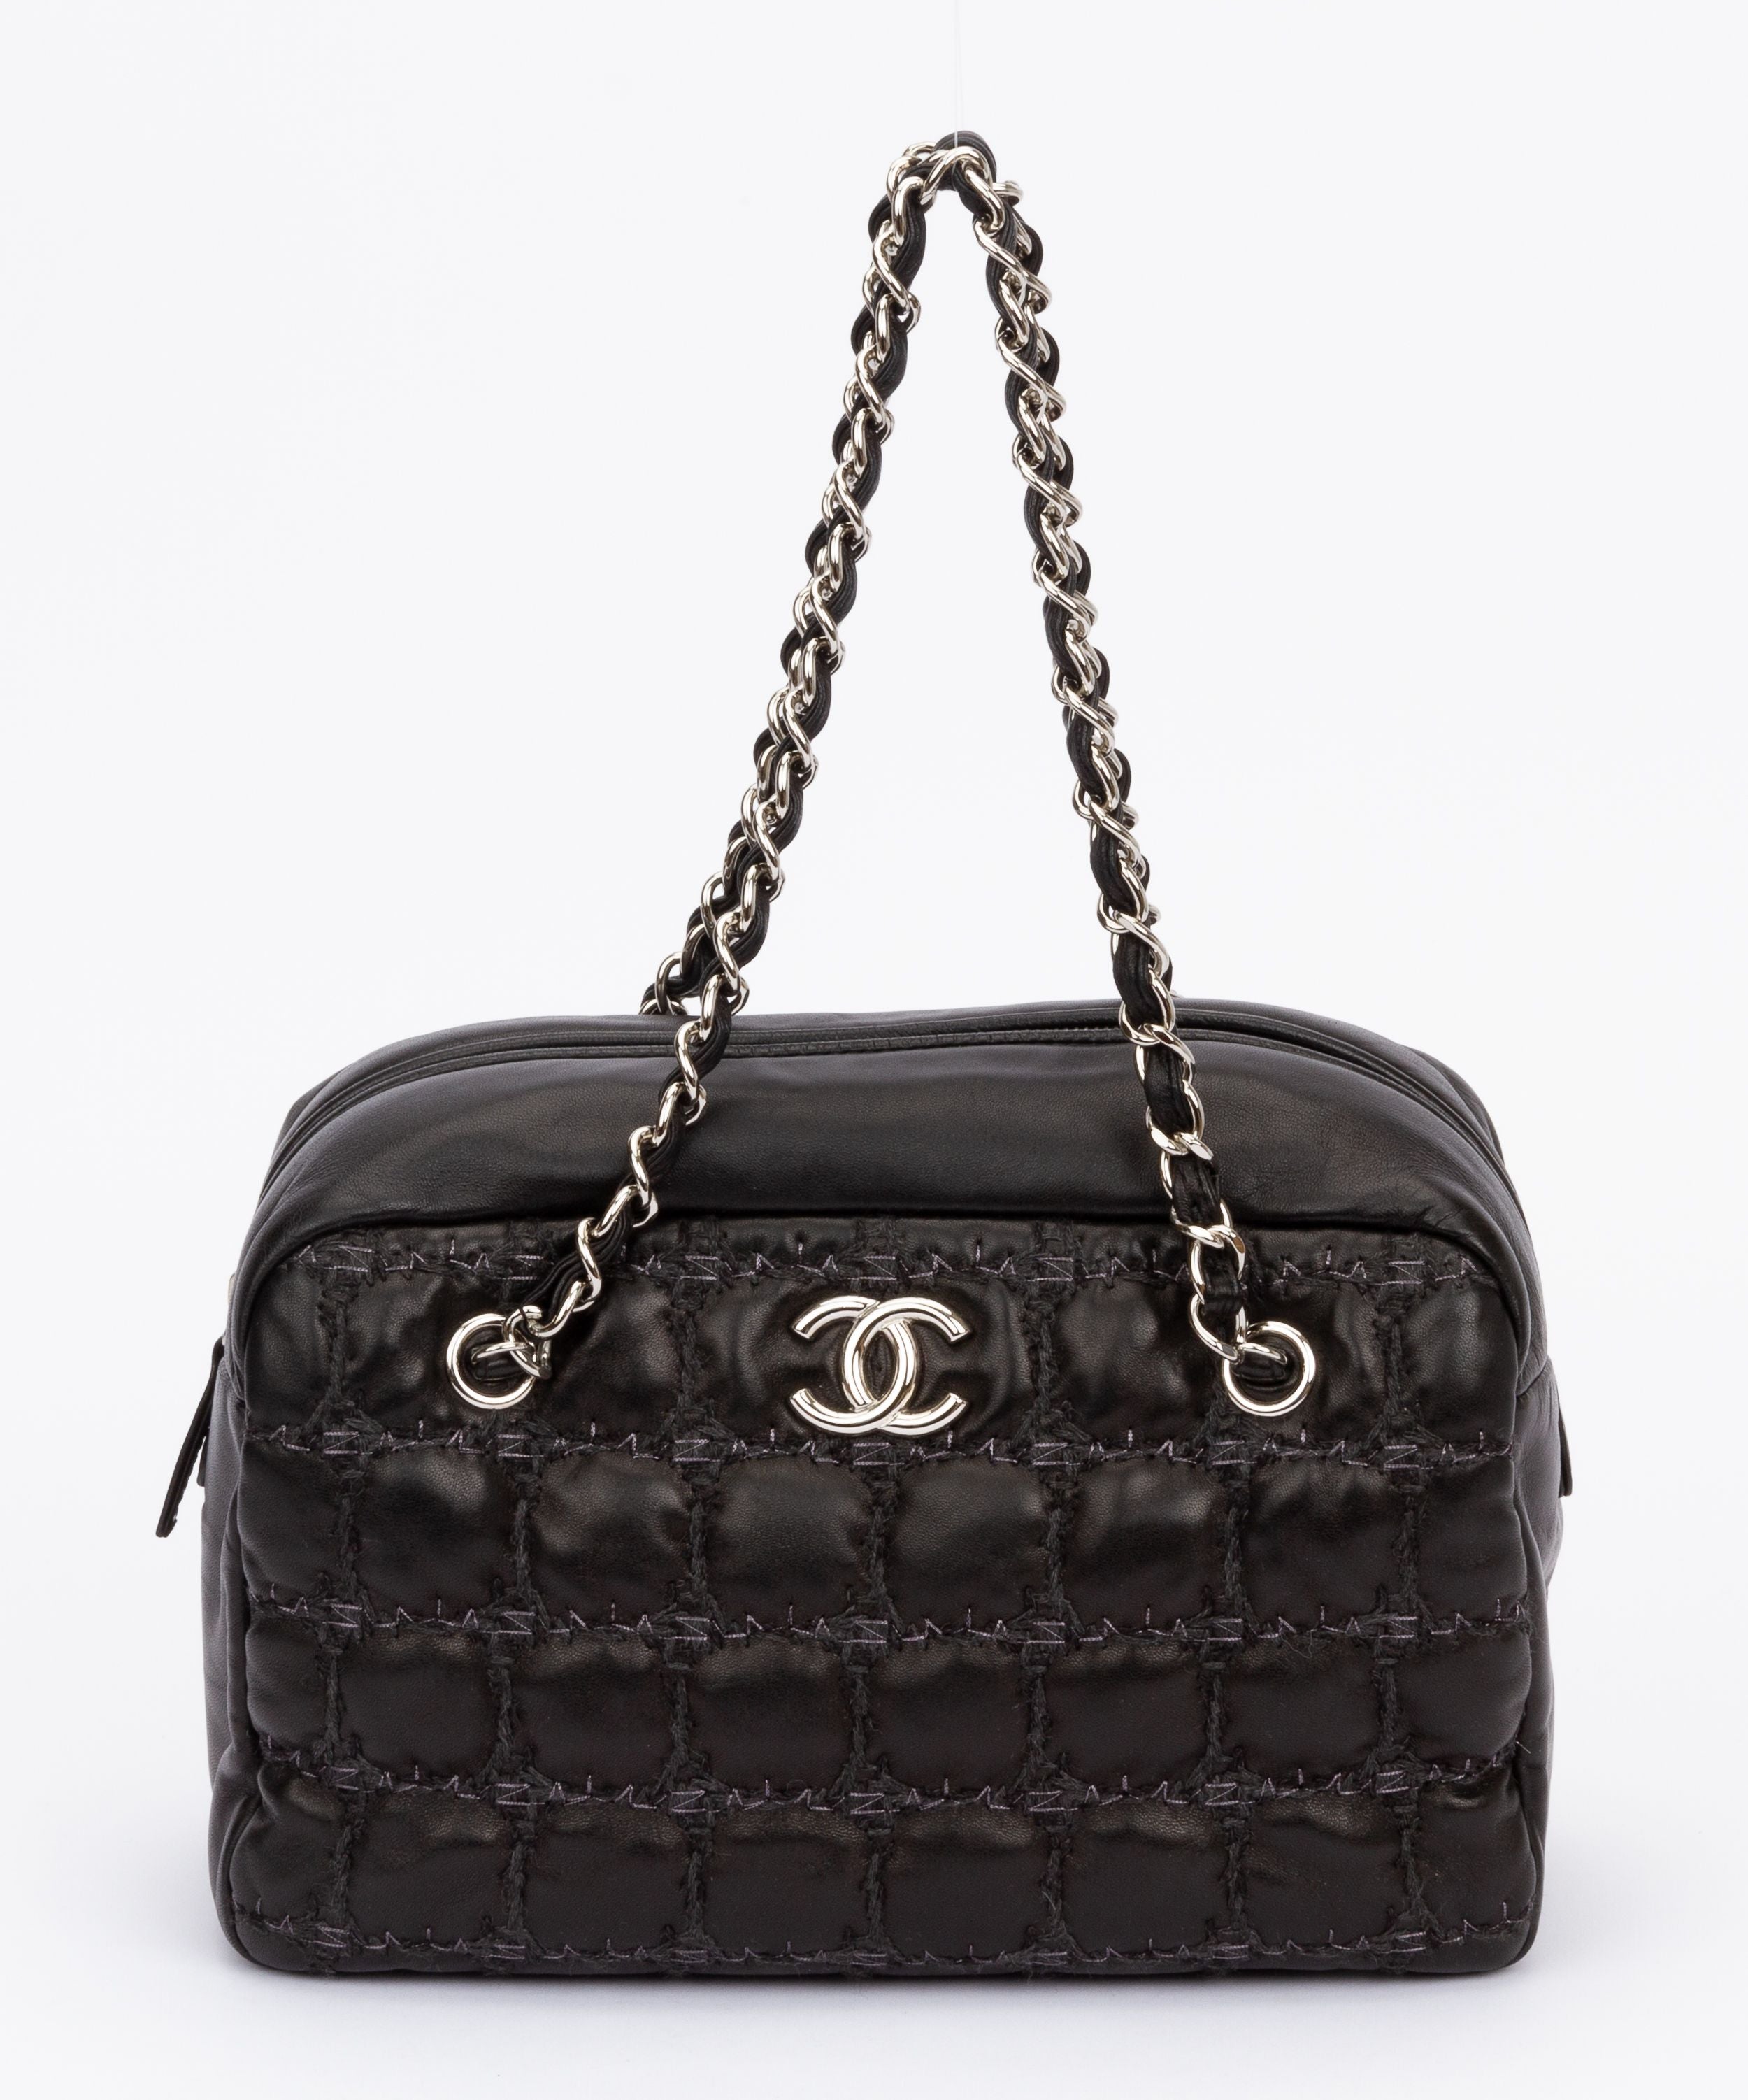 Chanel Tweed On Square Stitch Bubble Bag